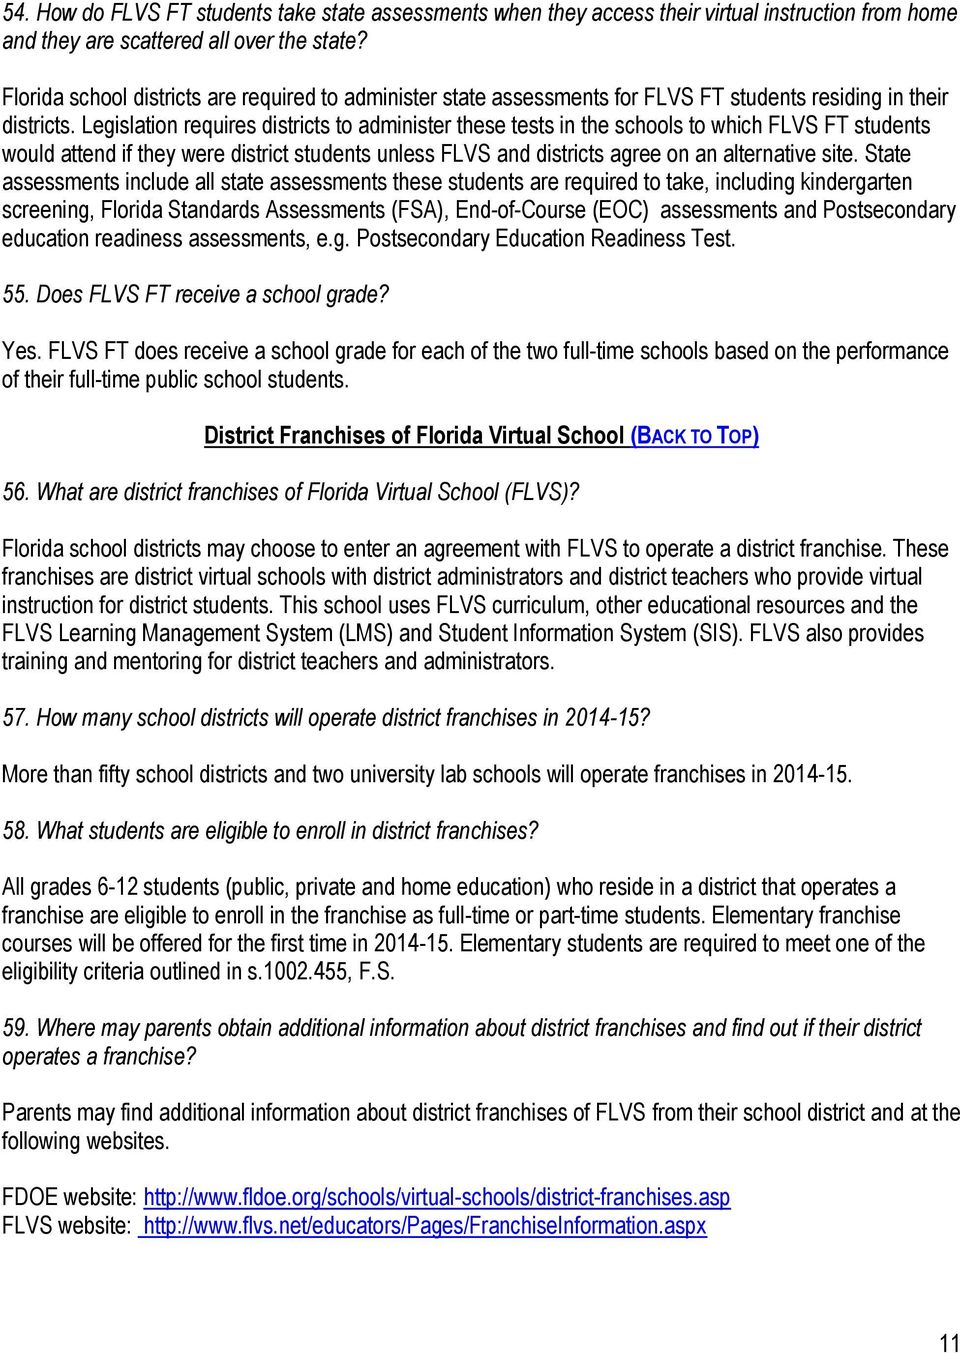 Legislation requires districts to administer these tests in the schools to which FLVS FT students would attend if they were district students unless FLVS and districts agree on an alternative site.